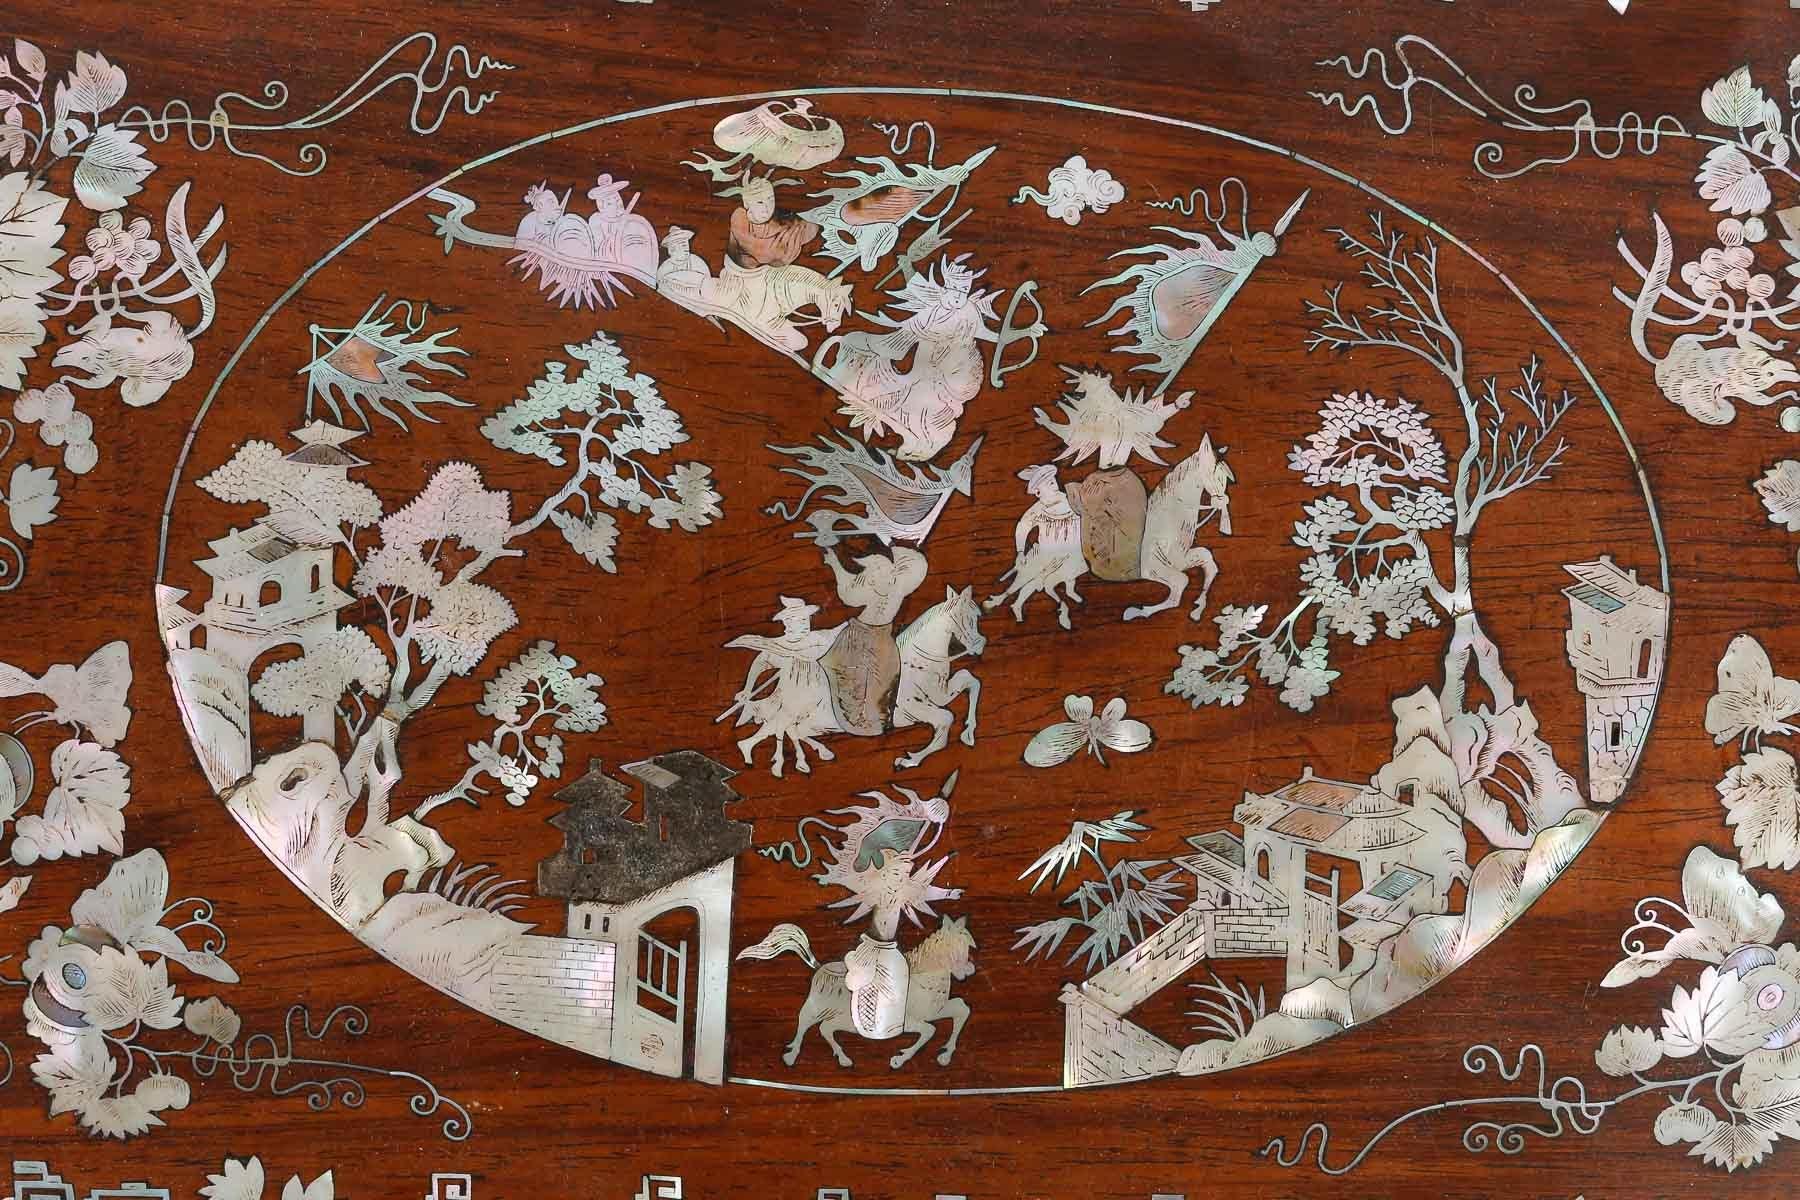 4 Panels of a Wooden Box with Mother of Pearl Inlay, Chinese Scenes, 19th Century.

4 panels of a wooden box with mother-of-pearl inlays depicting Chinese scenes, Asian Art, 19th century.  

1-H: 20cm , W: 32cm, D: 1cm
2-H: 11,5cm , W: 32cm, D: